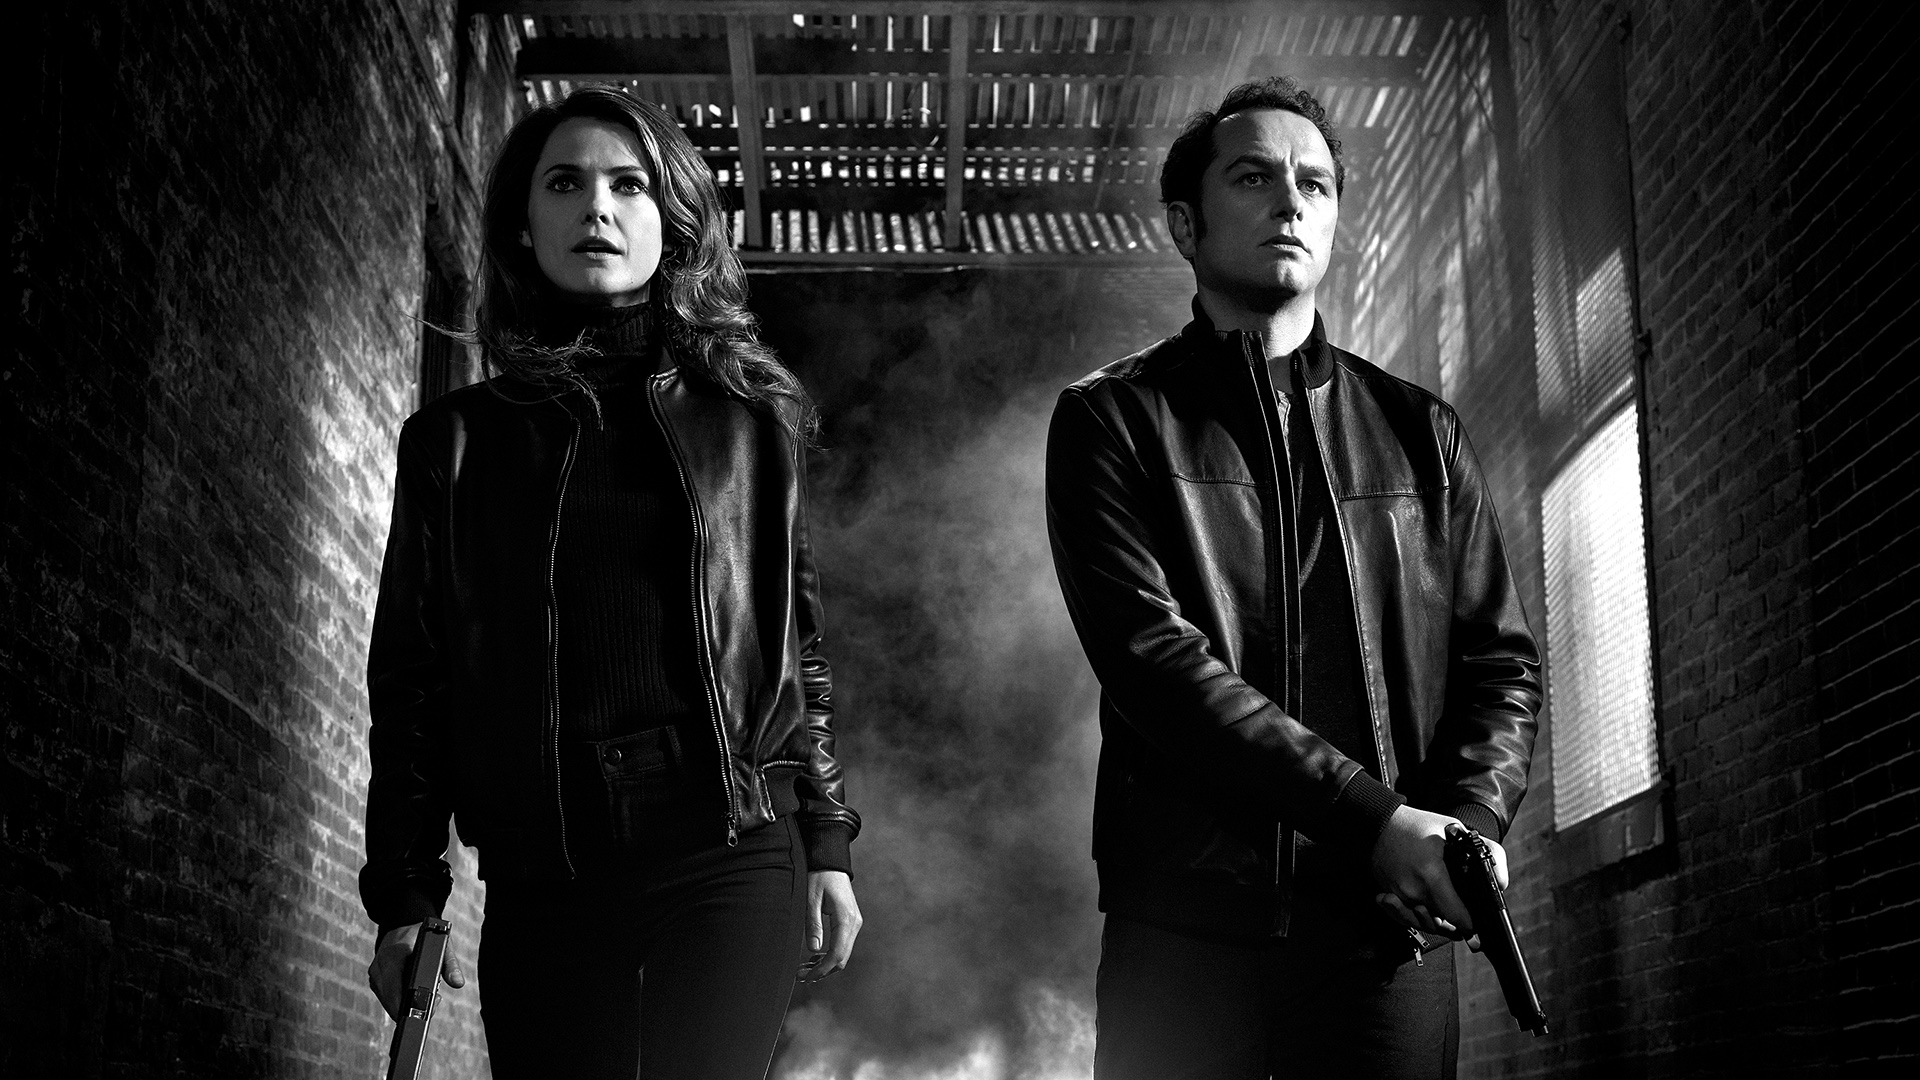 tv show, the americans, black & white, keri russell, matthew rhys, the americans (tv show)